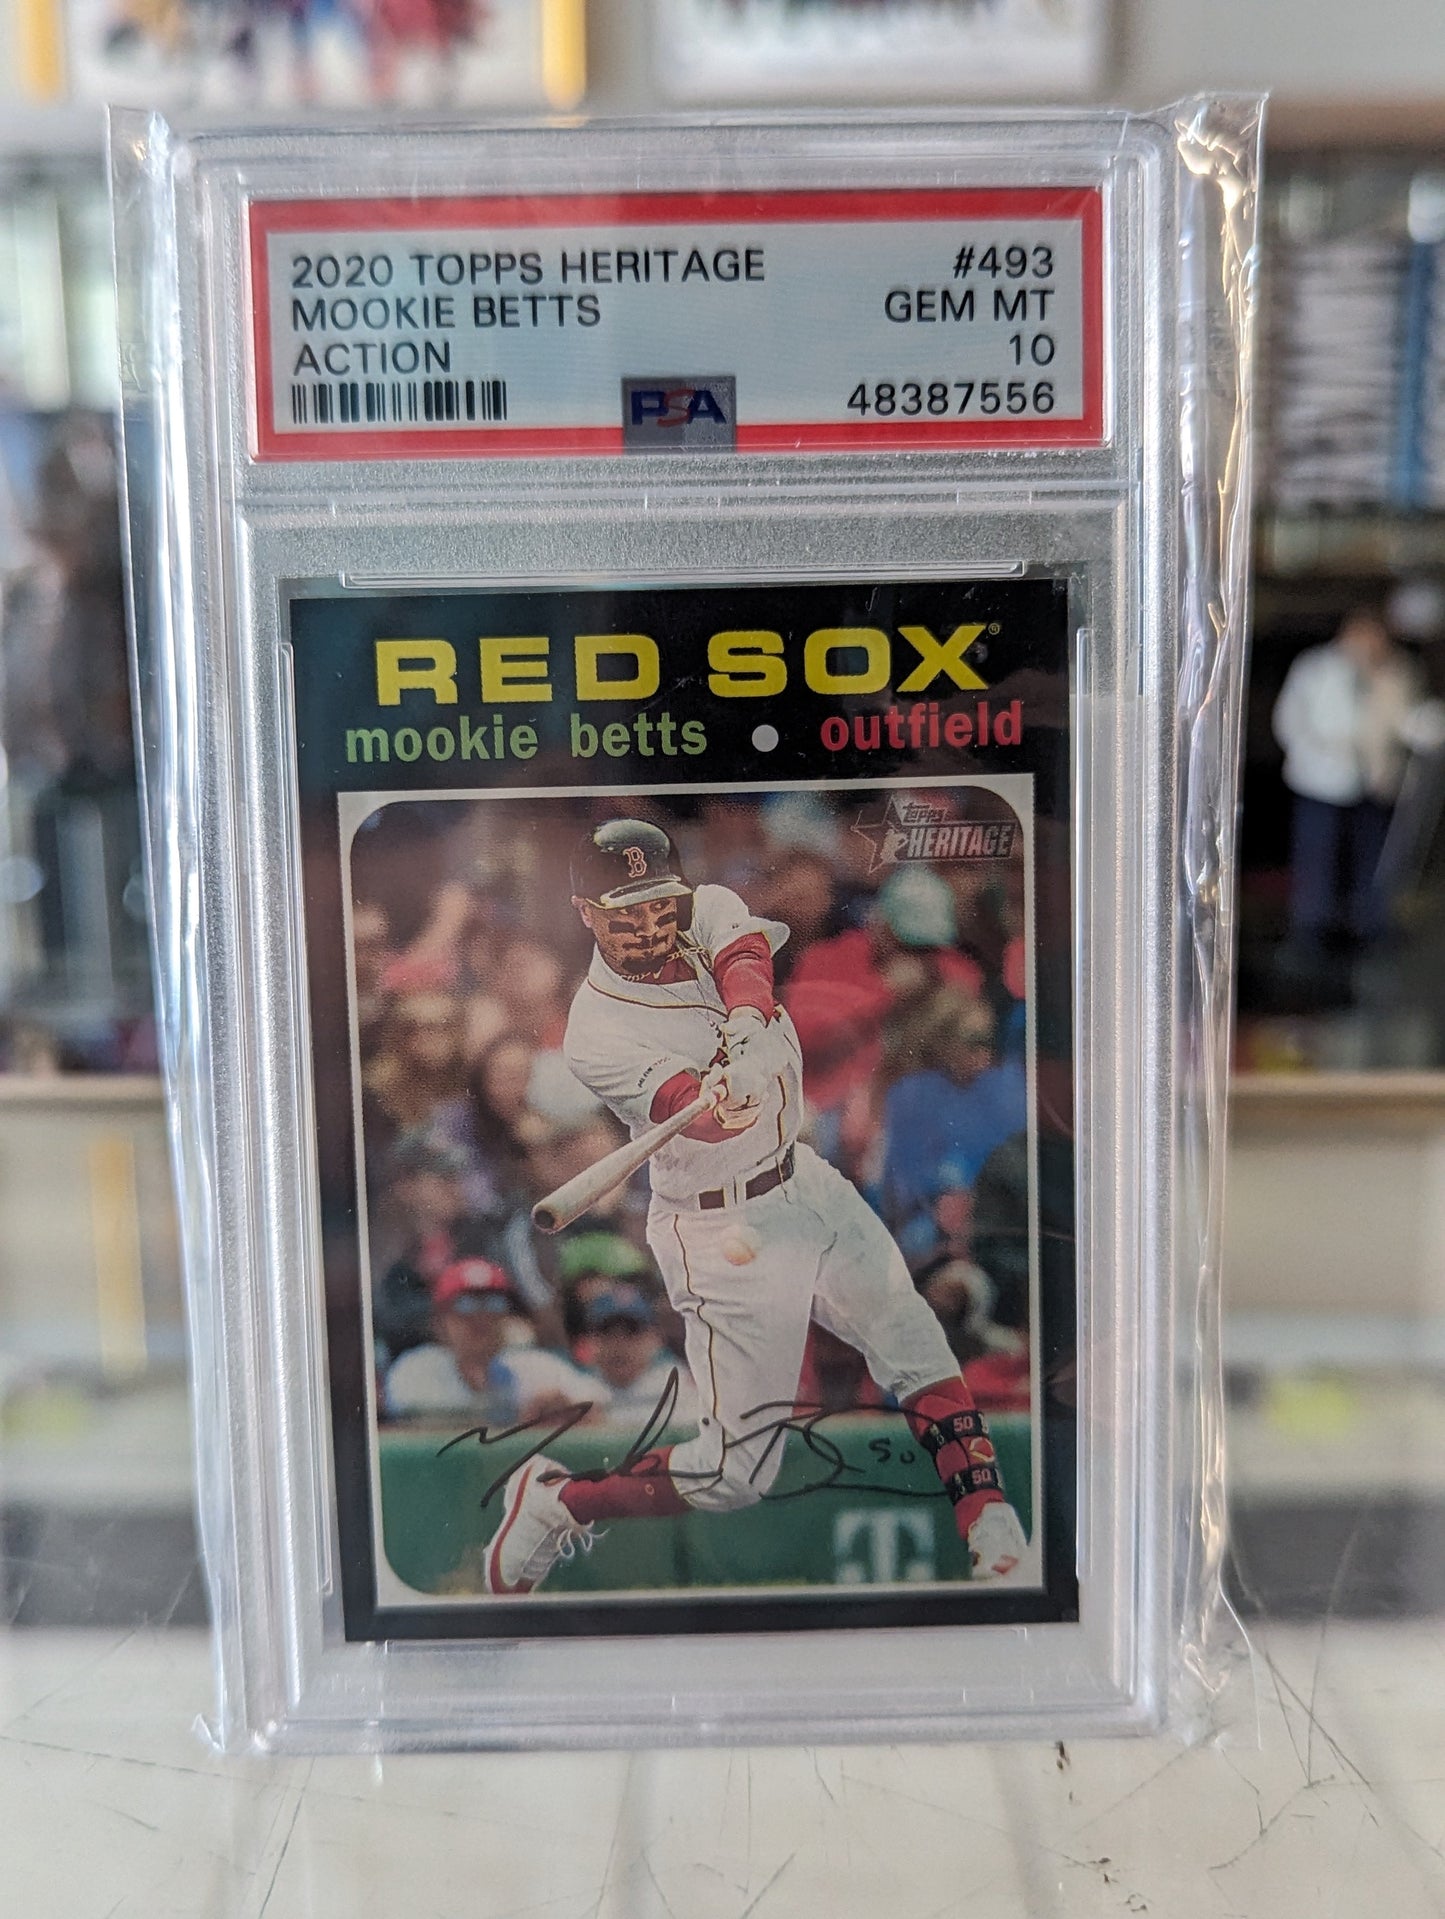 2020 Topps Heritage Mookie Betts Action PSA 10 - Covert Comics and Collectibles